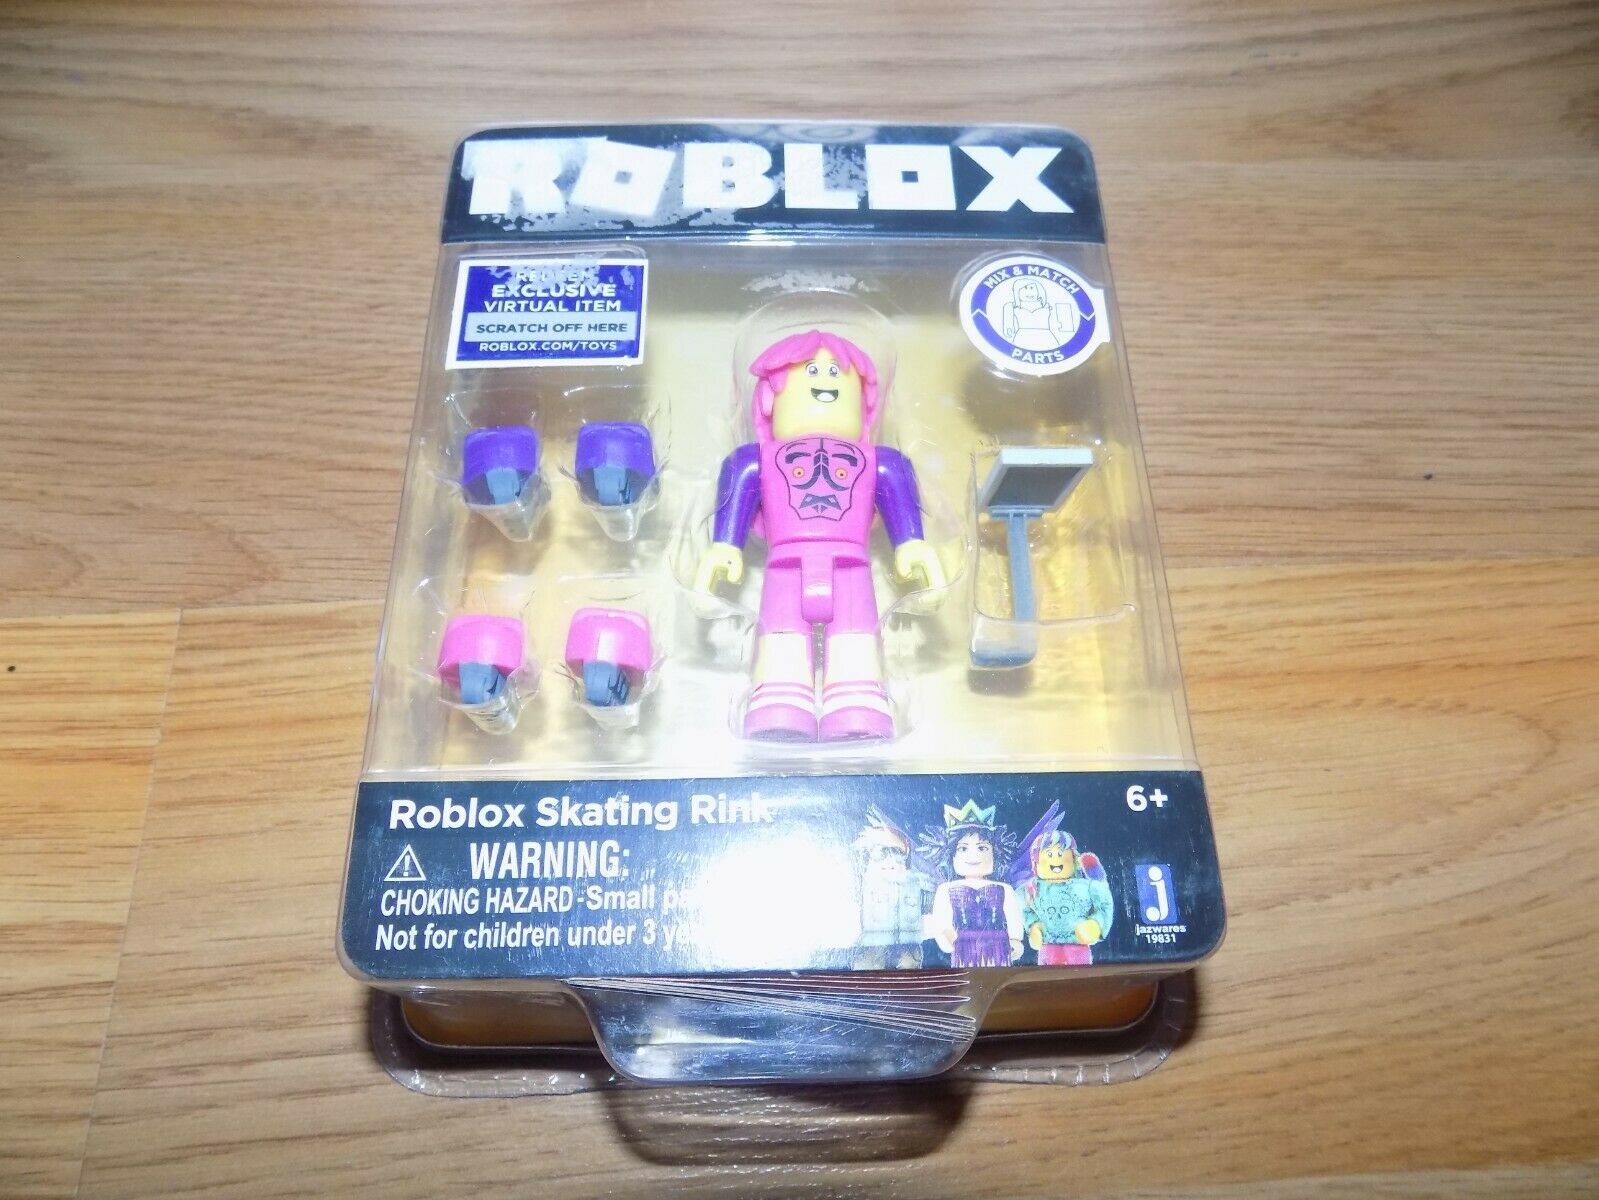 Roblox Skating Rink Action Figure Toy Mix And 50 Similar Items - details about roblox neverland lagoon salameen the spider queen mix match parts virtual code